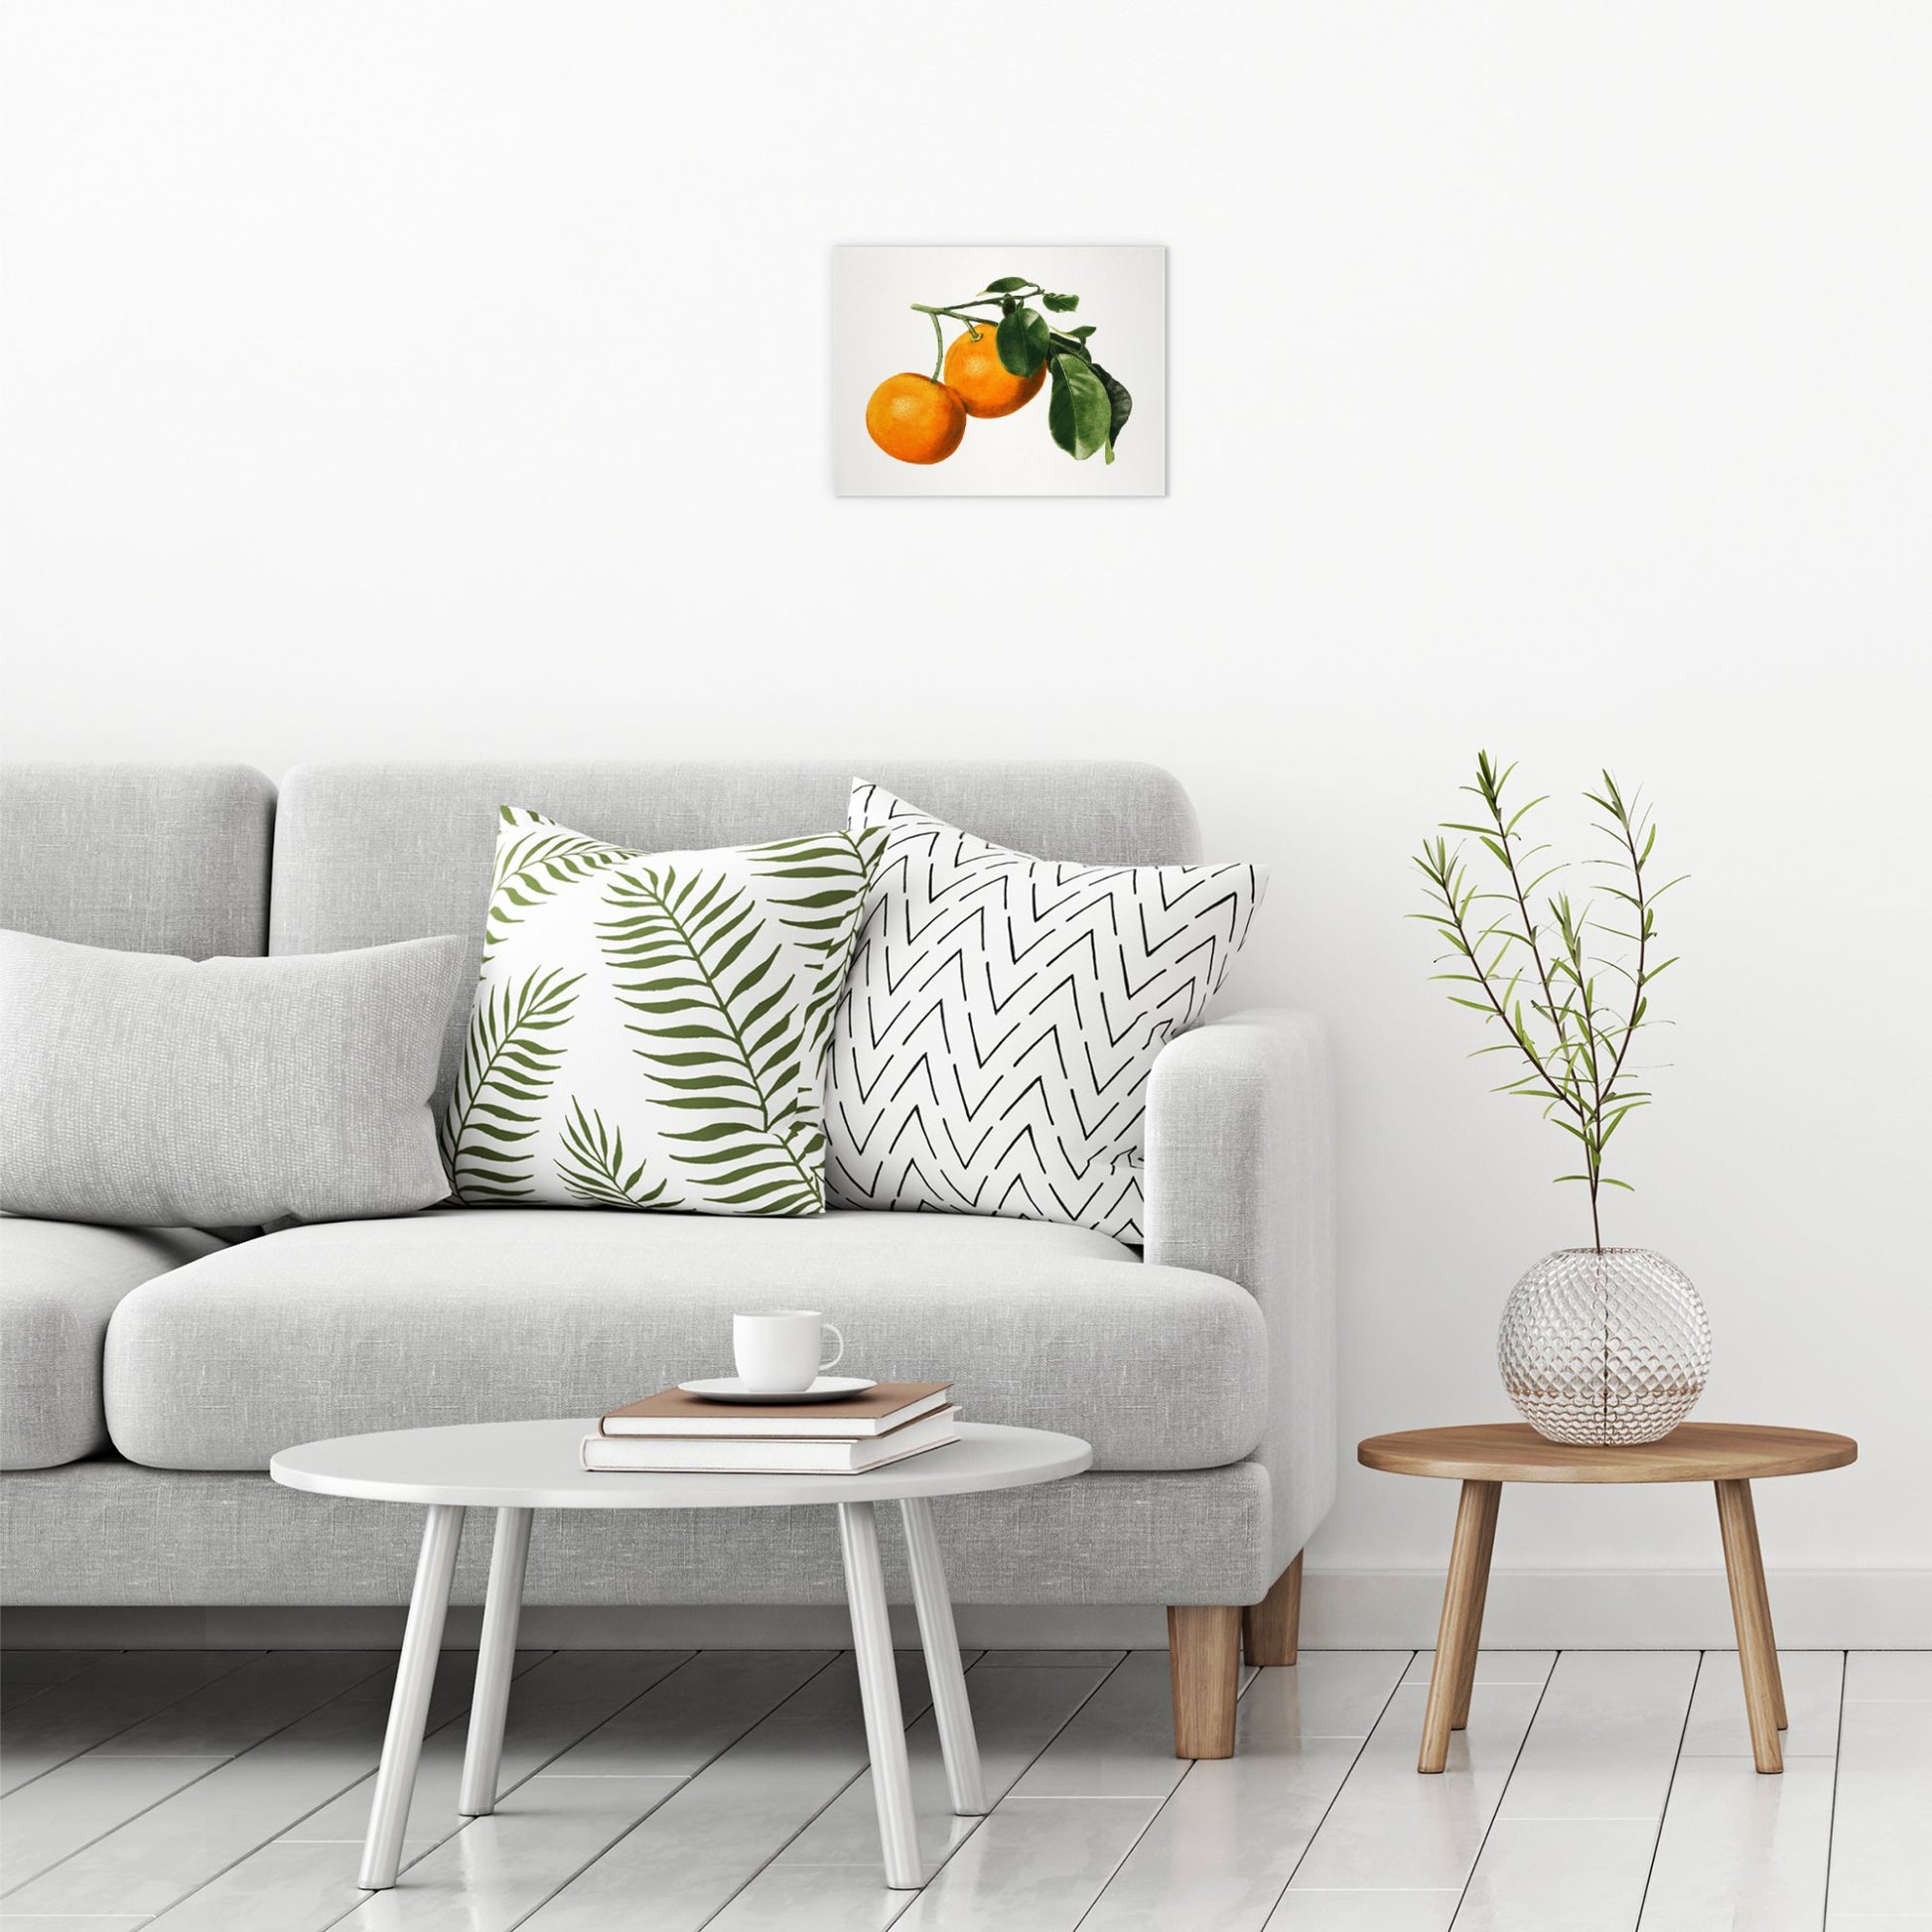 A contemporary modern room view showing a small size metal art poster display plate with printed design of a Vintage Watercolour Illustration of Oranges